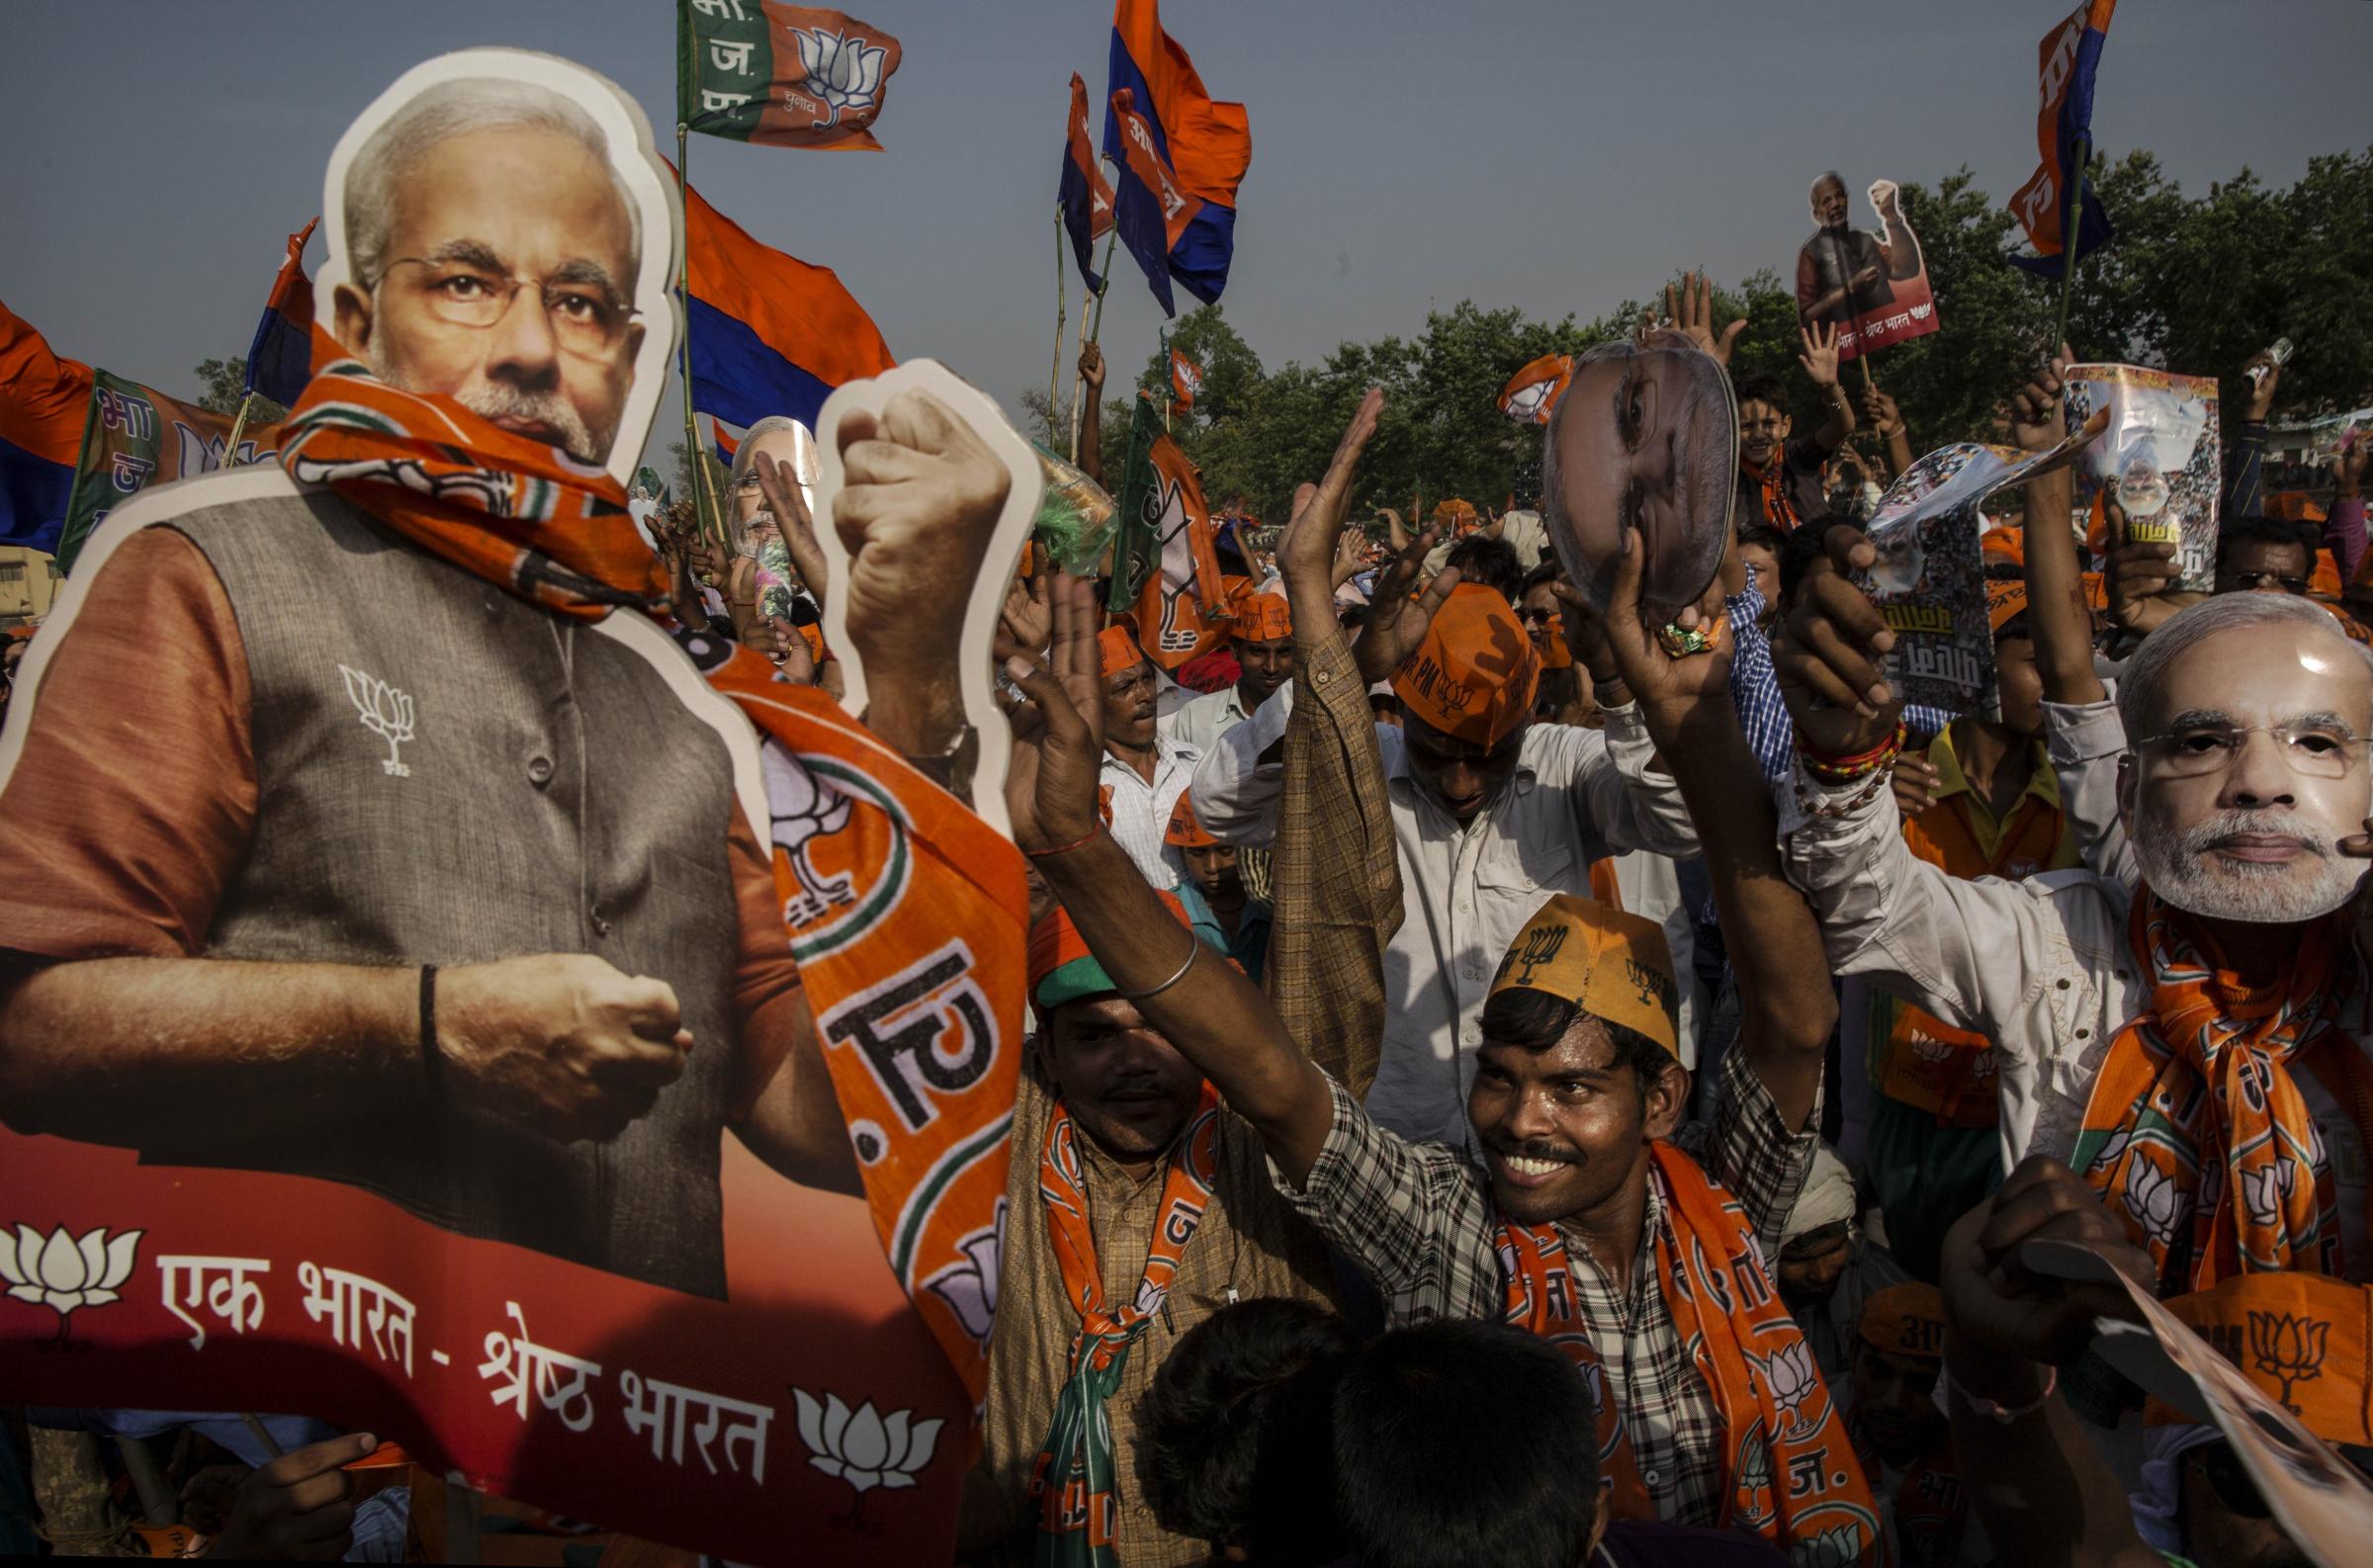 Supporters of BJP leader Narendra Modi cheer during his speech at a rally by the leader on May 8, 2014 in Rohaniya, near Varanasi.